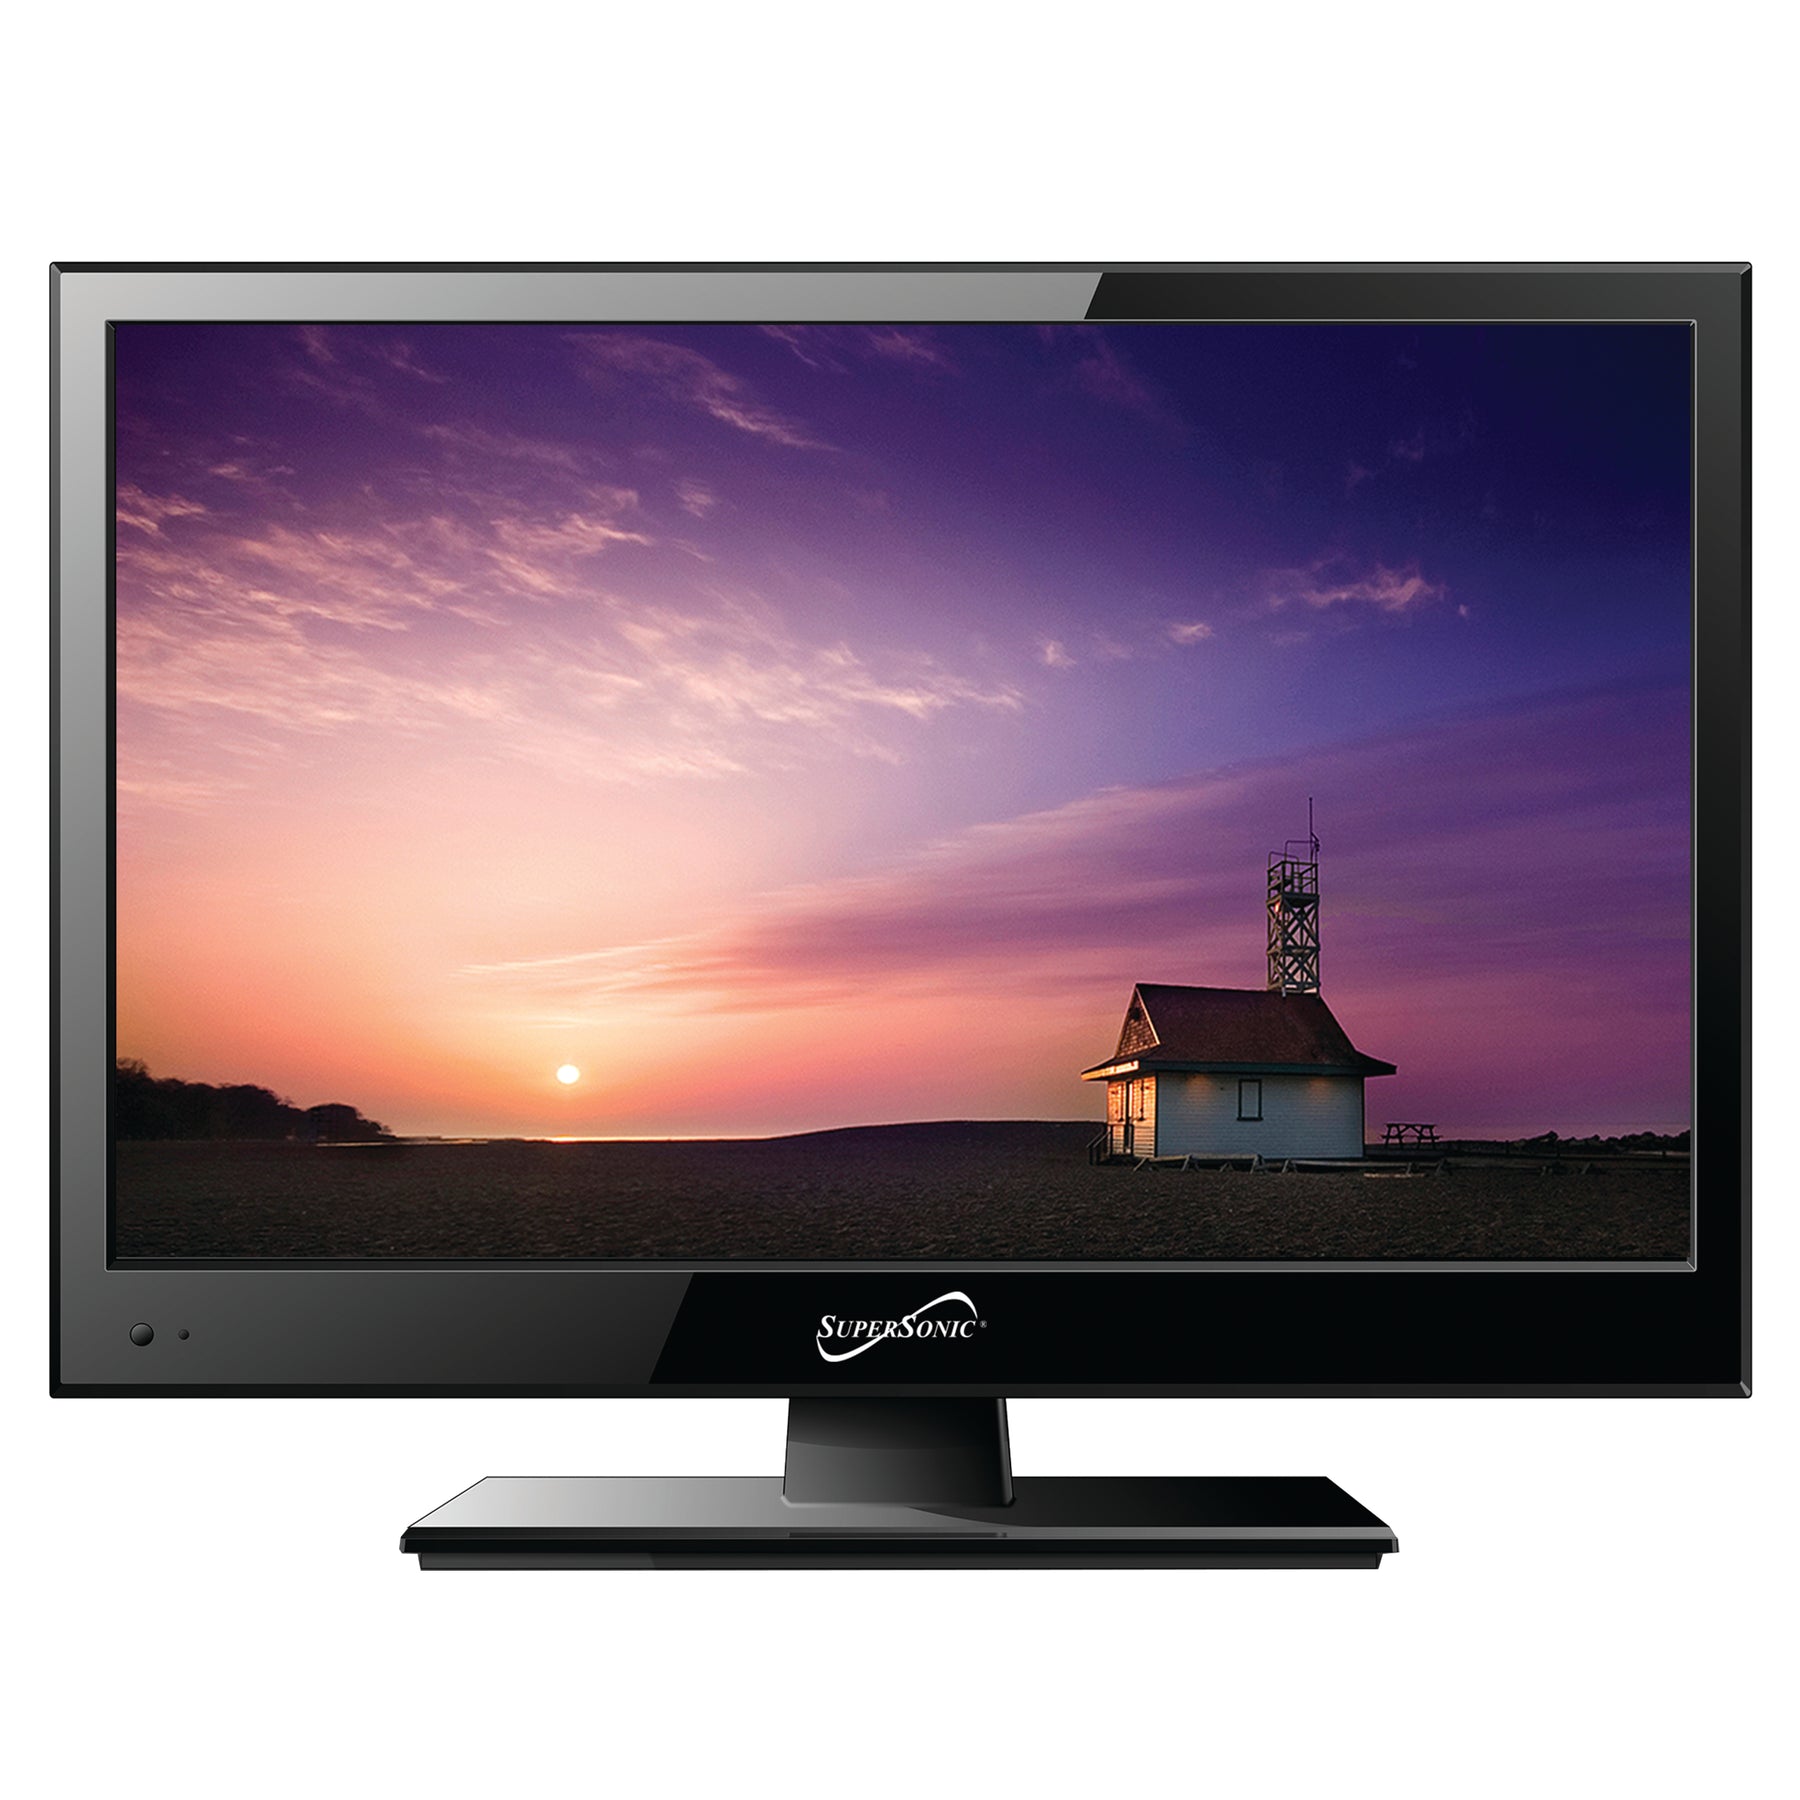 Supersonic 15.6" Supersonic 12 Volt AC/DC Widescreen LED HDTV with USB and HDMI (SC-1511)